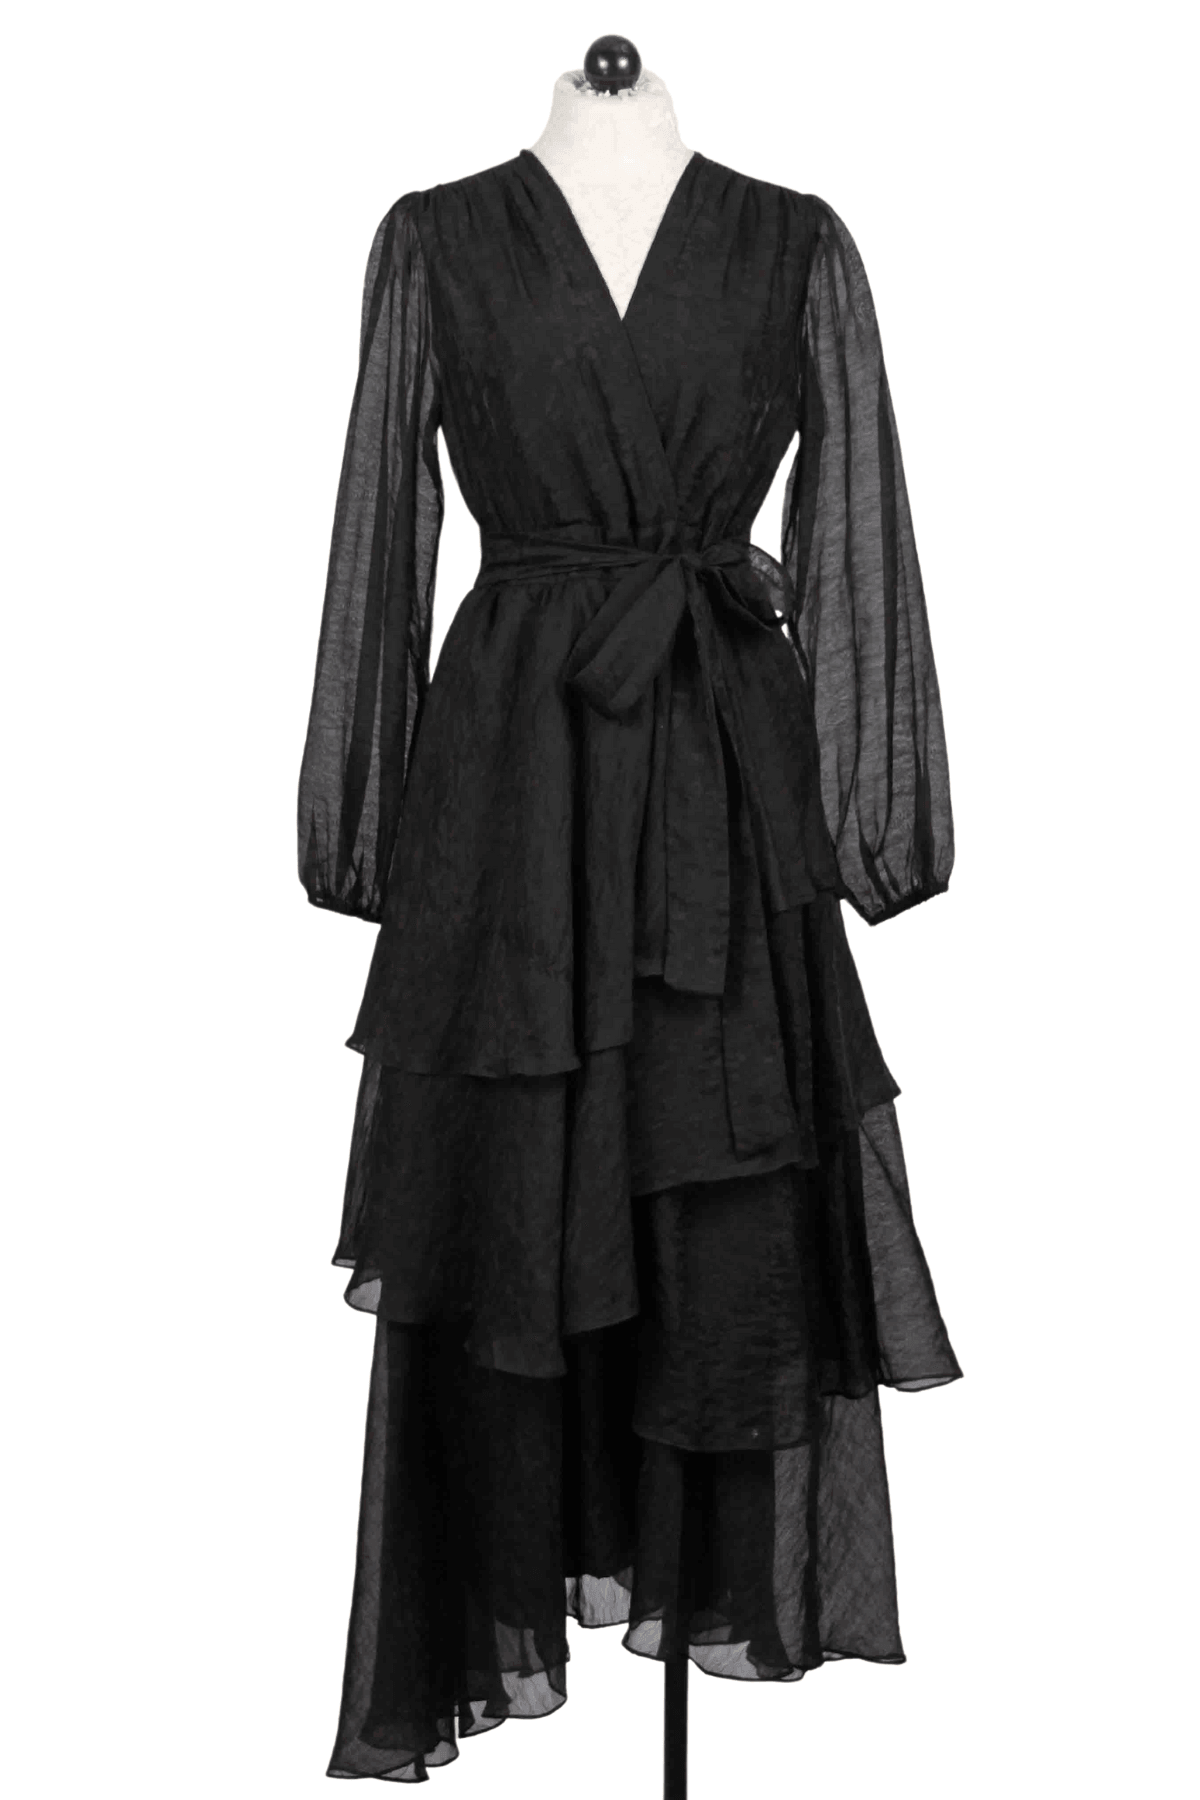 black Long Sleeve Tessa Tiered Maxi Dress by Marie Oliver